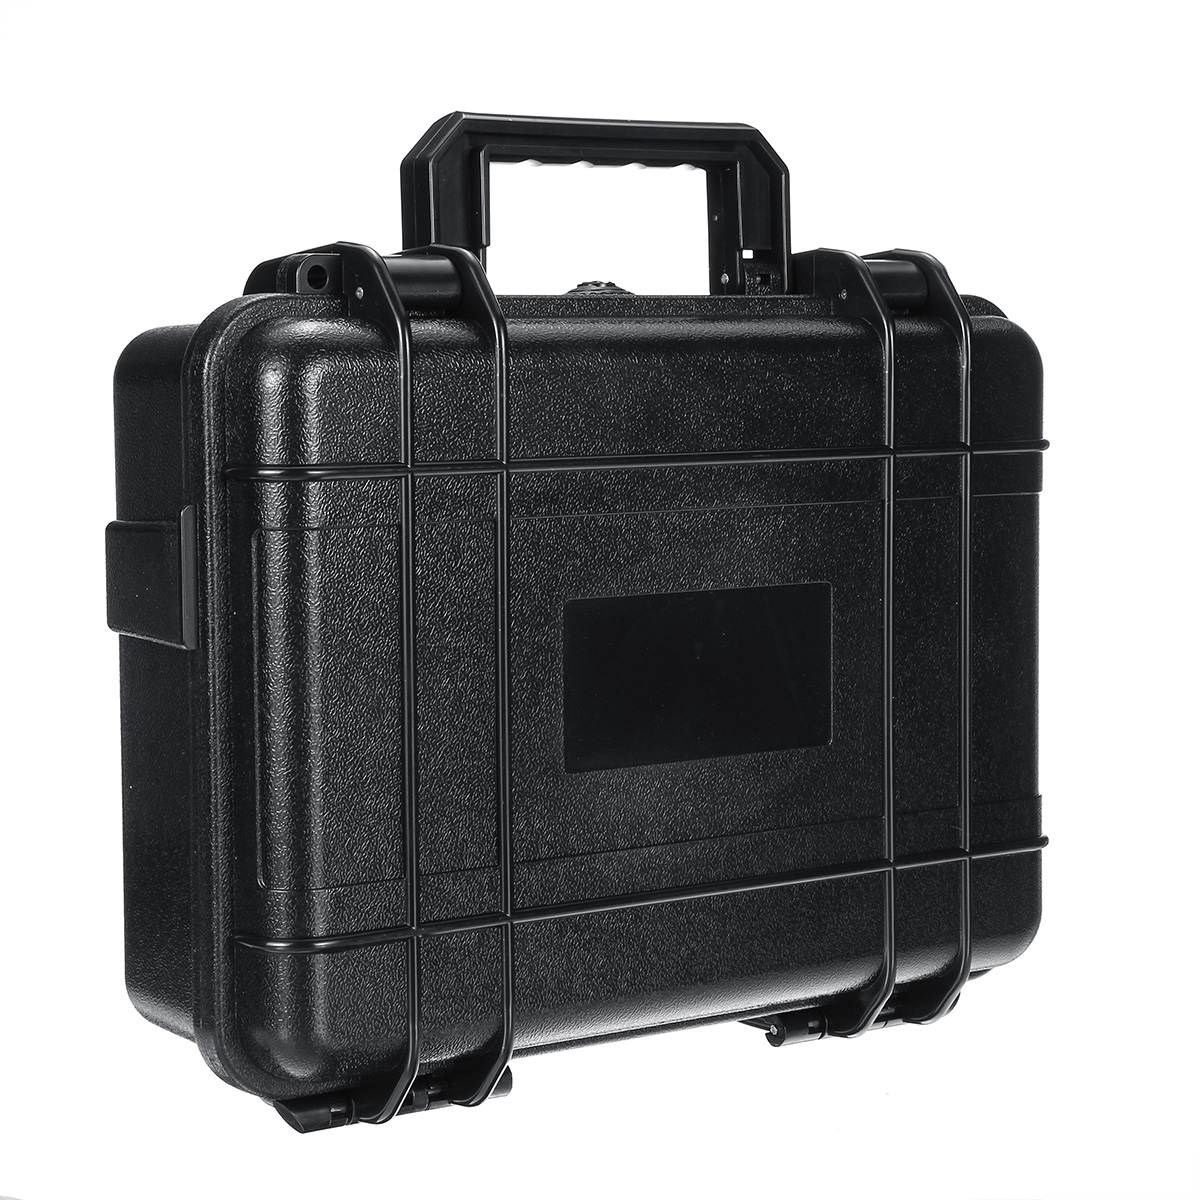 Outdoor-Portable-EDC-Instrument-Tool-Kits-Box-Waterproof-Shockproof-Protective-Safety-Storage-Case-1553948-5